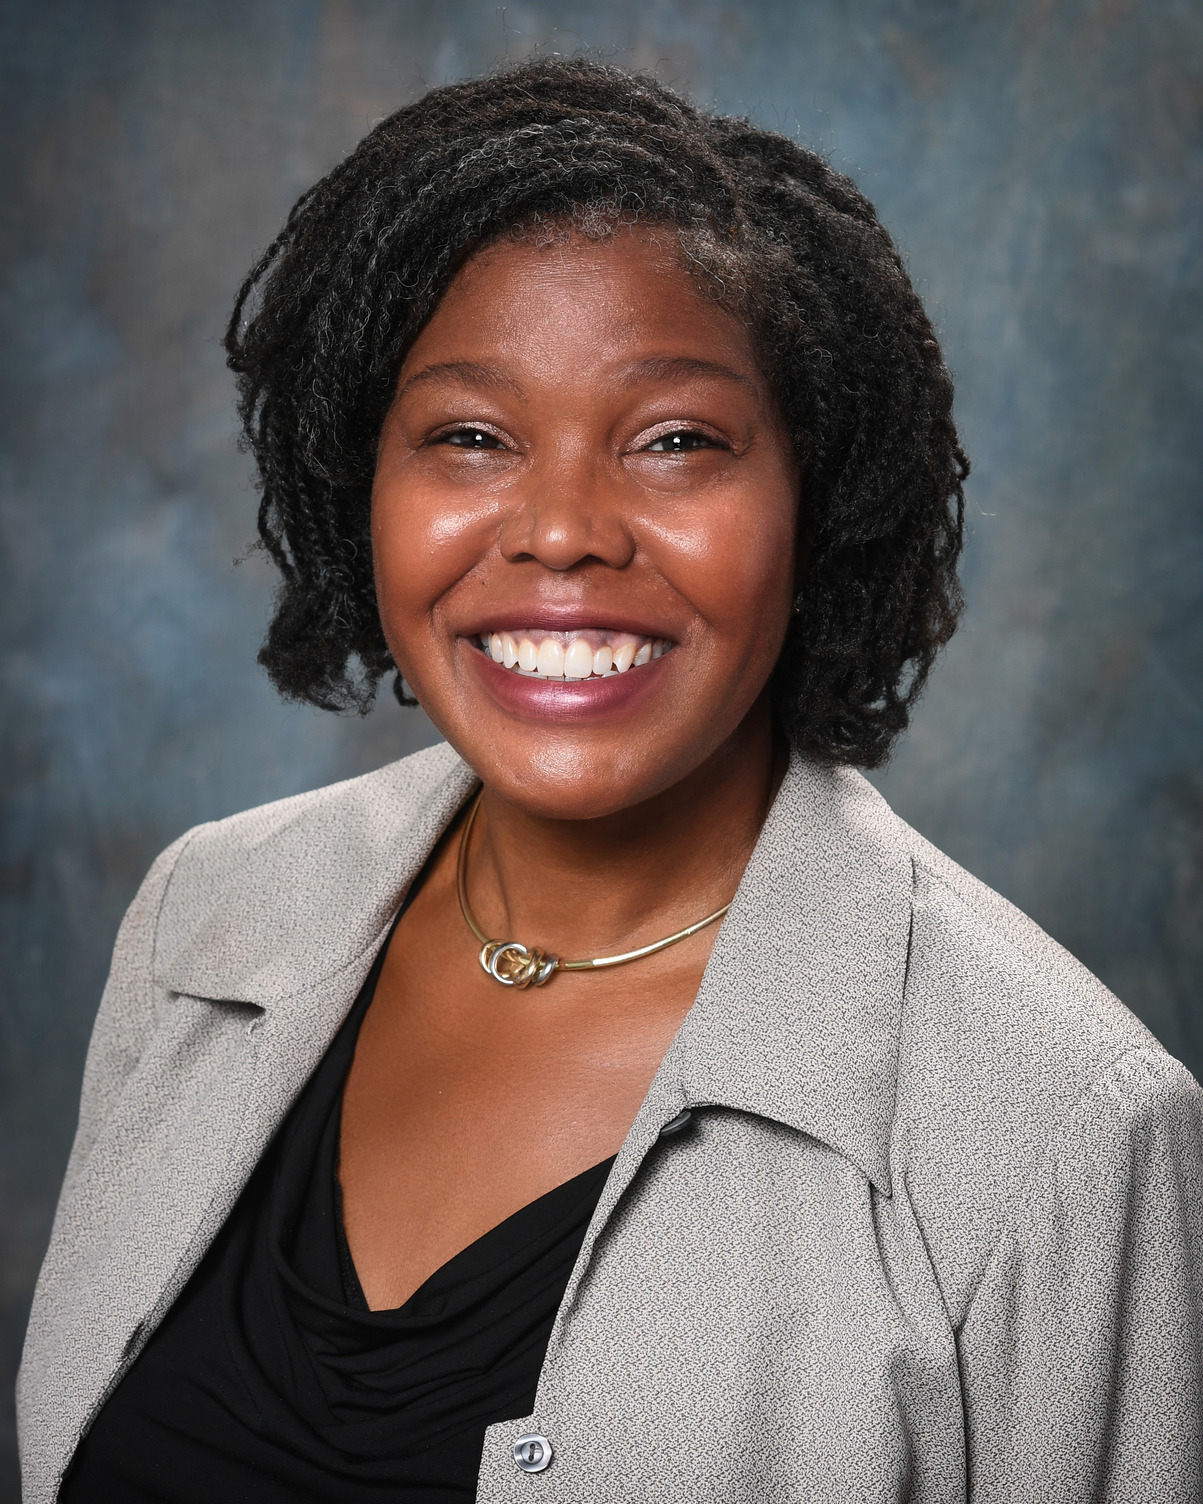 This is a portrait of Dr. Tabbetha Dobbins, a Black woman with dark curly hair threaded with silver strands. She is smiling and wearing a tweed suit jacket over a dark blouse. 